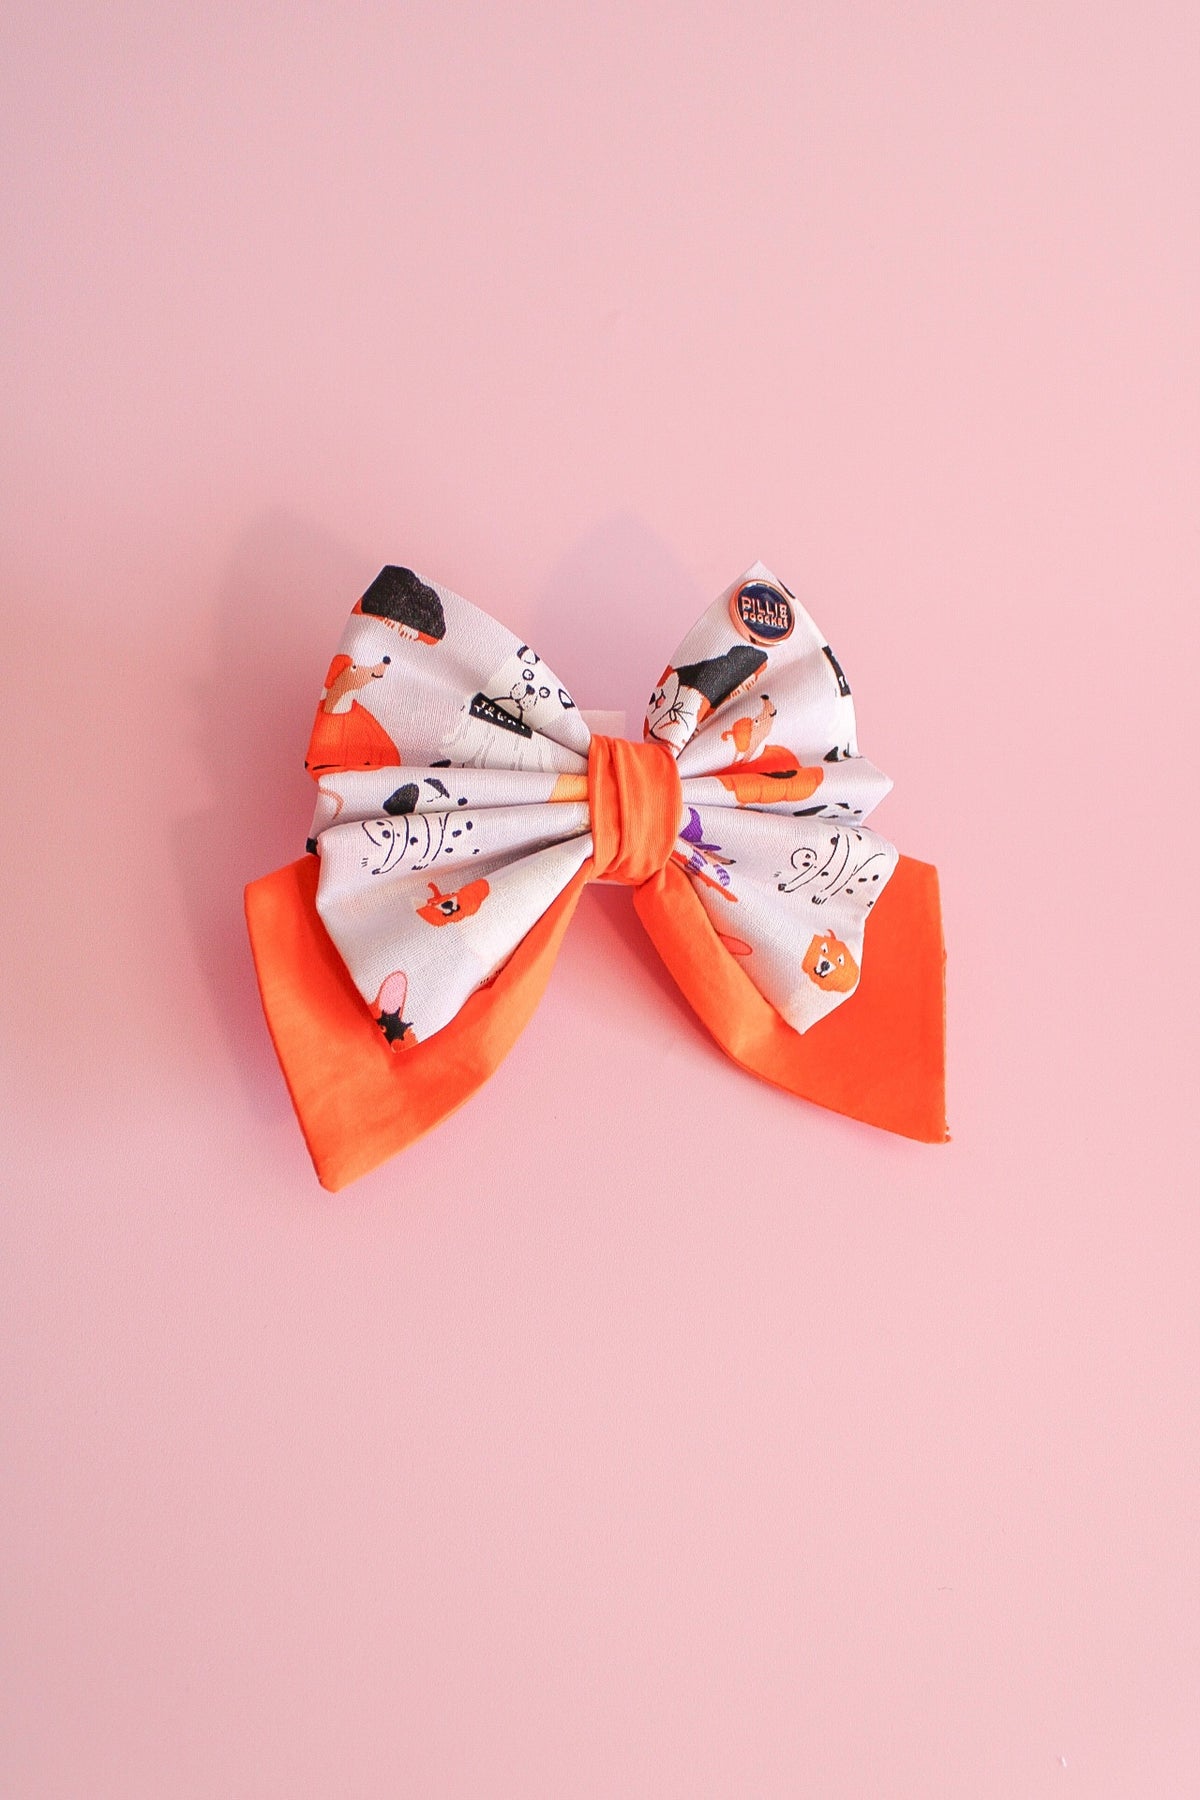 Woof-een Two-Tone w/orange- Bows (Sailor or Standard)